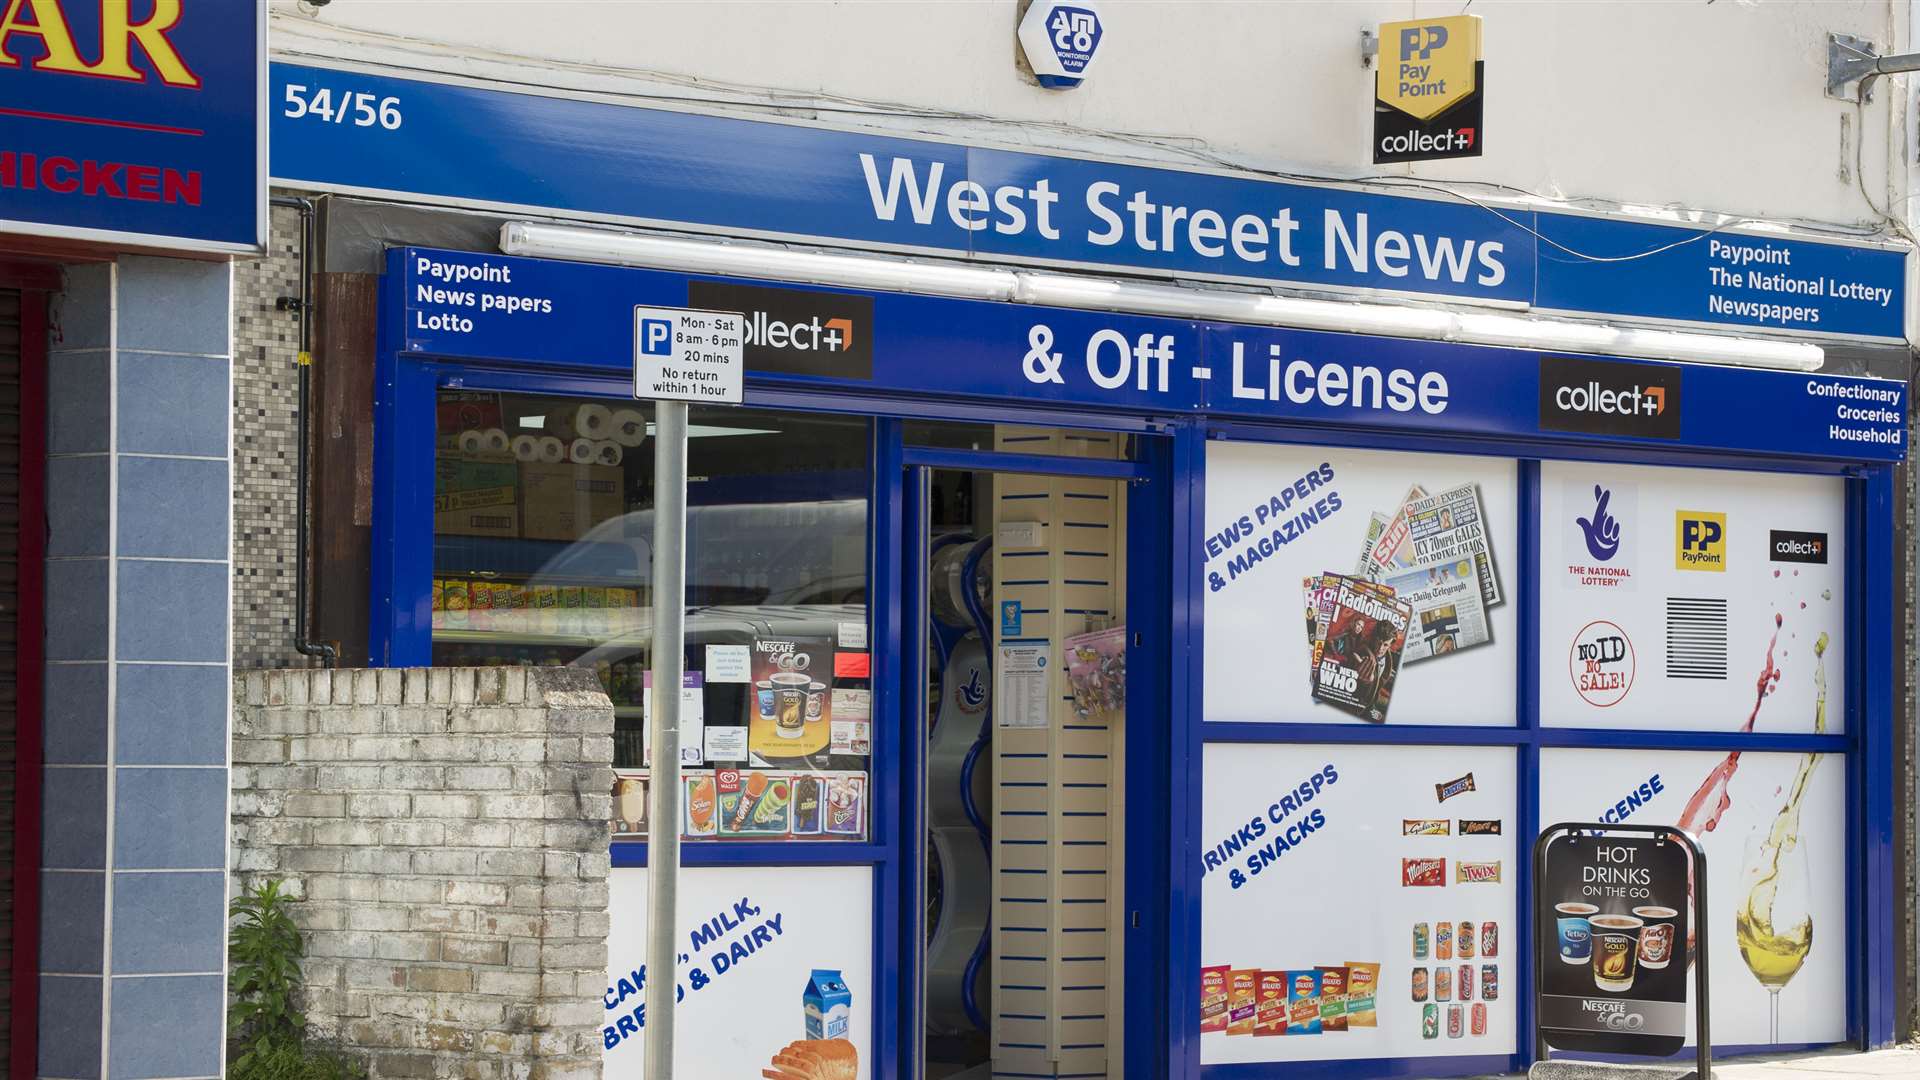 West Street News, in West Street, Sittingbourne, has a spelling error in its off-licence sign